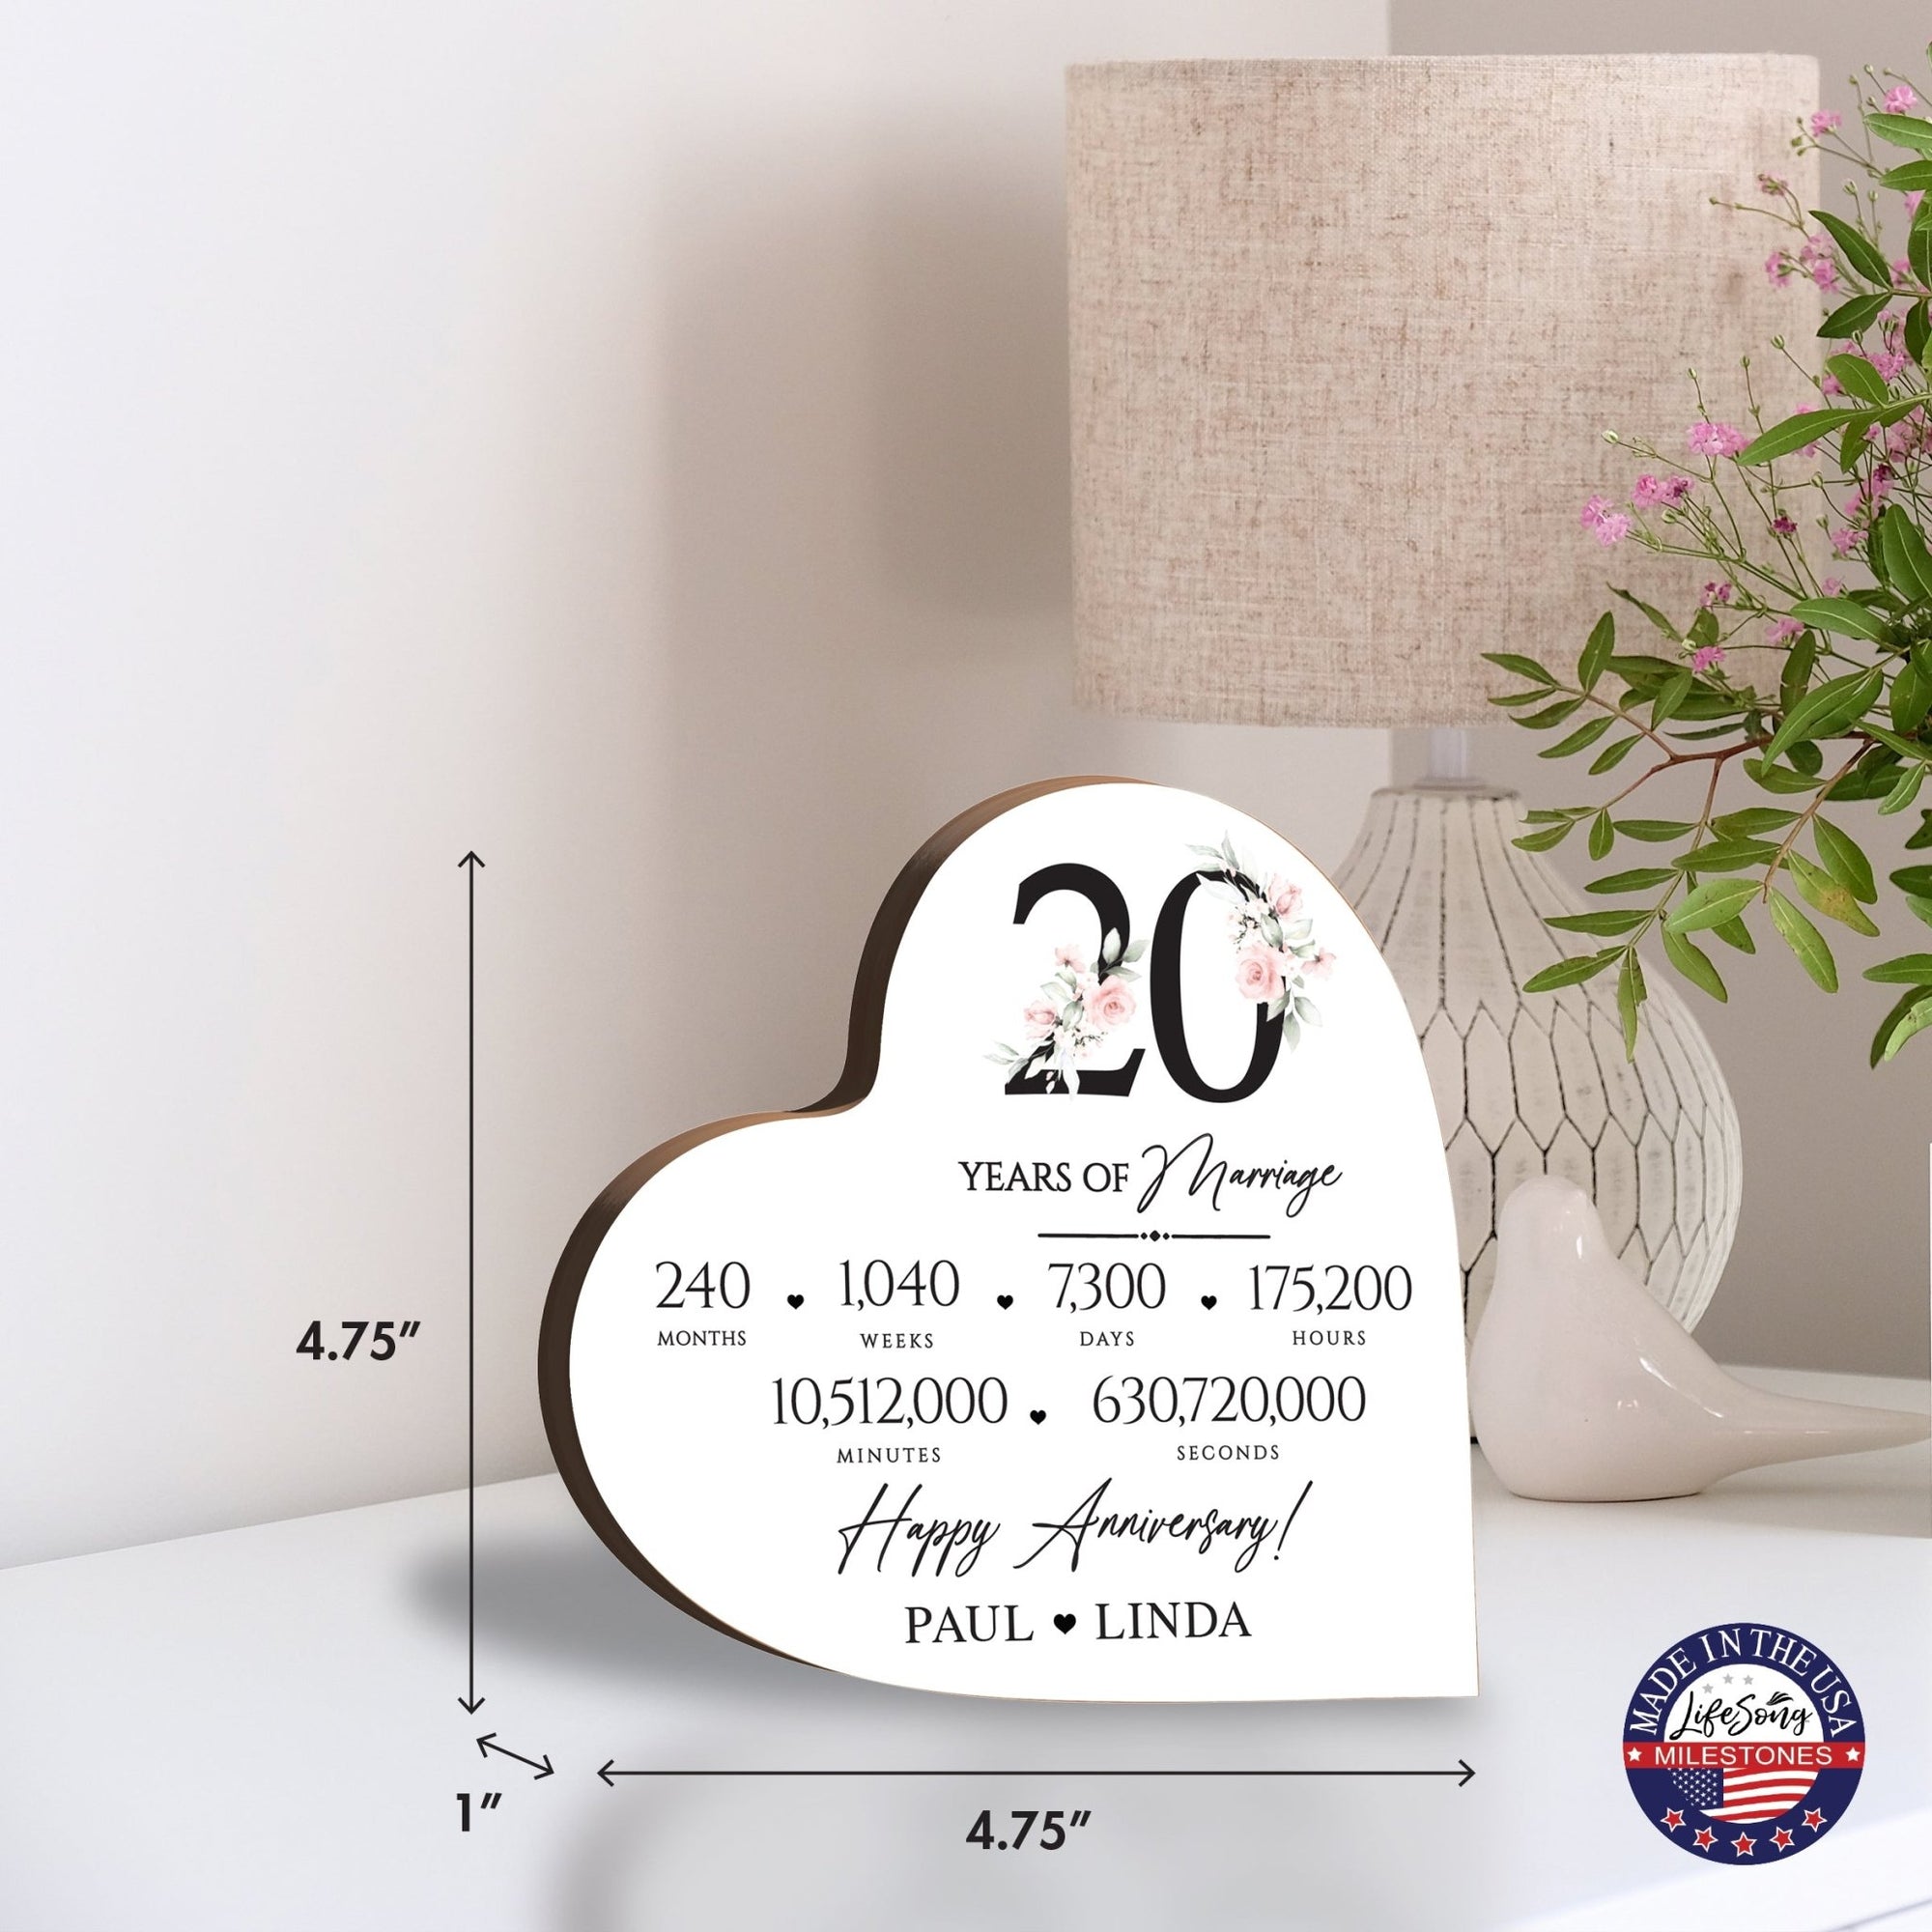 Personalized Wooden Anniversary Heart Shaped Signs - 20th Anniversary - LifeSong Milestones